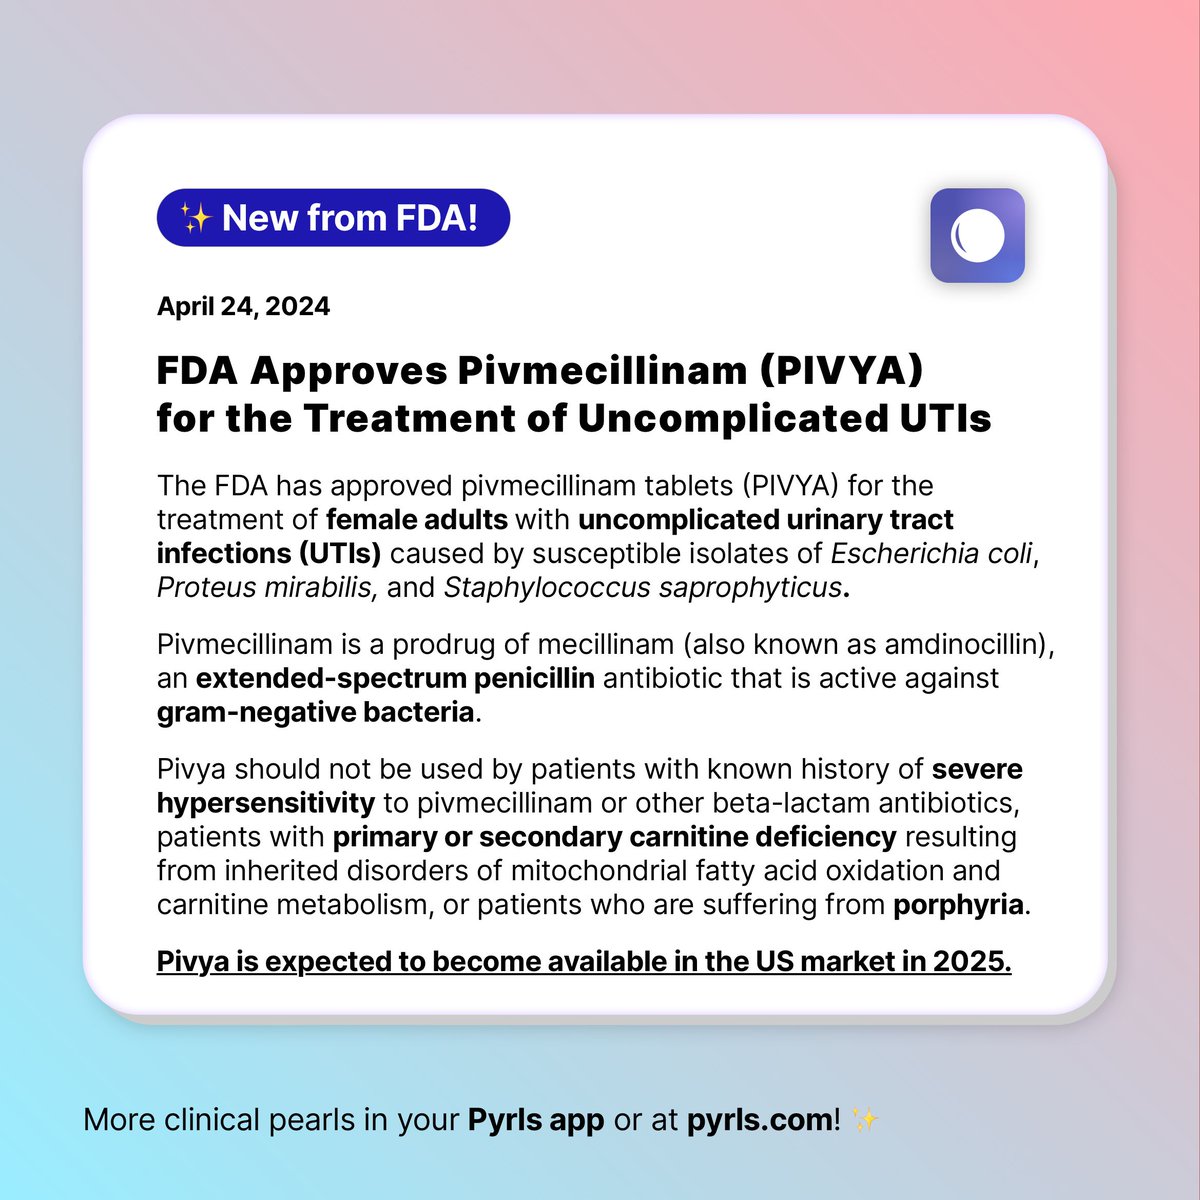 FDA Approves Pivmecillinam (PIVYA) for the Treatment of Uncomplicated UTIs